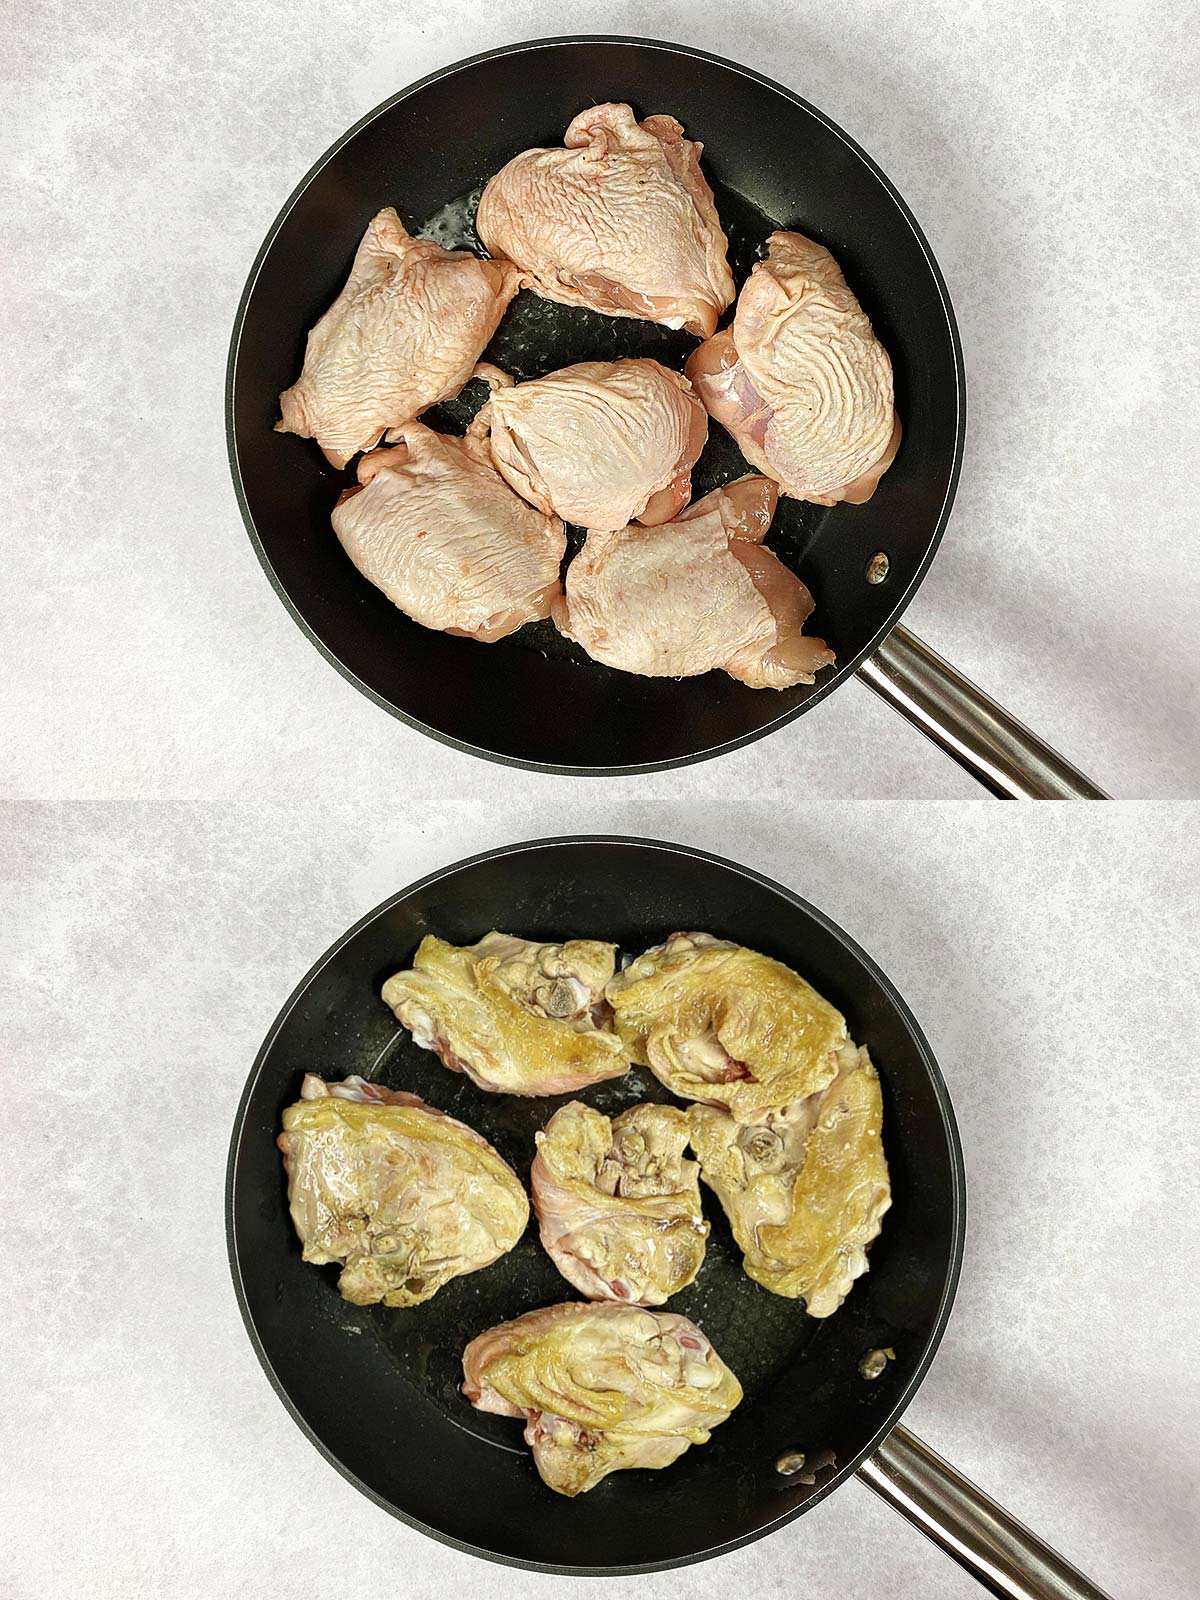 Two shot collage of a chicken cooking in a frying pan showing both sides of the chicken.